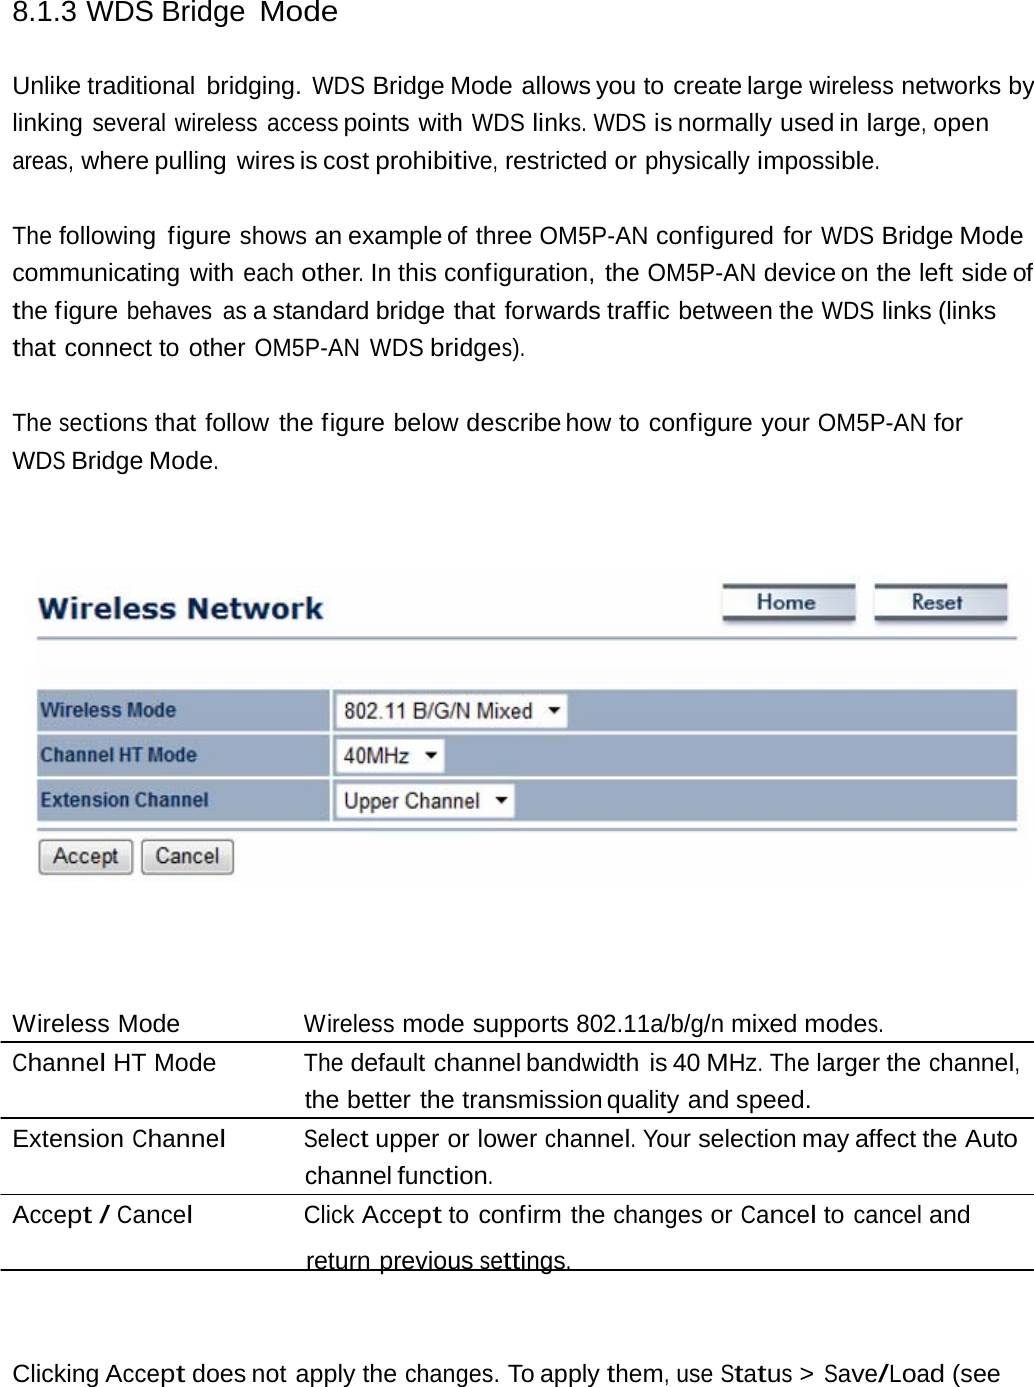 8.1.3 WDS Bridge Mode Unlike traditional  bridging. WDS Bridge Mode allows you to create large wireless networks by linking several wireless access points with WDS links. WDS is normally used in large, open areas, where pulling  wires is cost prohibitive, restricted or physically impossible. The following figure shows an example of three OM5P-AN configured for WDS Bridge Mode communicating with each other. In this configuration, the OM5P-AN device on the left  side of the figure behaves as a standard bridge that forwards traffic between the WDS links (links that connect to other OM5P-AN WDS bridges). The sections that follow the figure below describe how  to  configure  your OM5P-AN for WDS Bridge Mode. Wireless Mode  Wireless mode supports 802.11a/b/g/n mixed modes. Channel HT Mode  The default channel bandwidth is 40 MHz. The larger the channel, the better the transmission quality and speed. Extension Channel Select upper or lower channel. Your selection may affect the Auto channel function. Accept / Cancel Click Accept to confirm the changes or Cancel to cancel and return previous settings. Clicking Accept does not apply the changes. To apply them, use Status &gt; Save/Load (see 